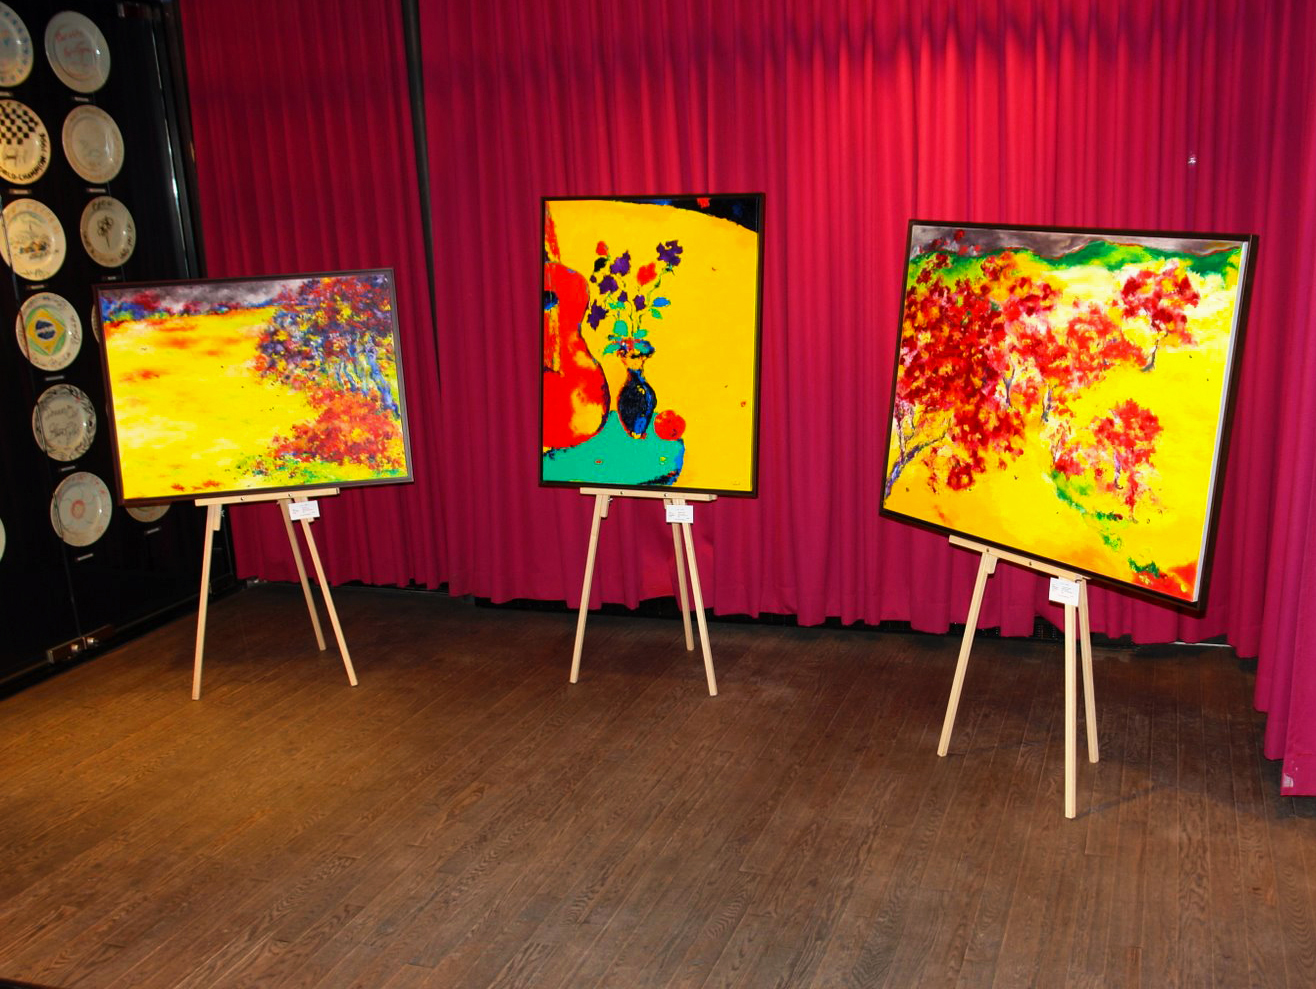 Maryse Casol, Rêveries painting, Art Exhibition 2007, Buonanotte, Montreal, Canada